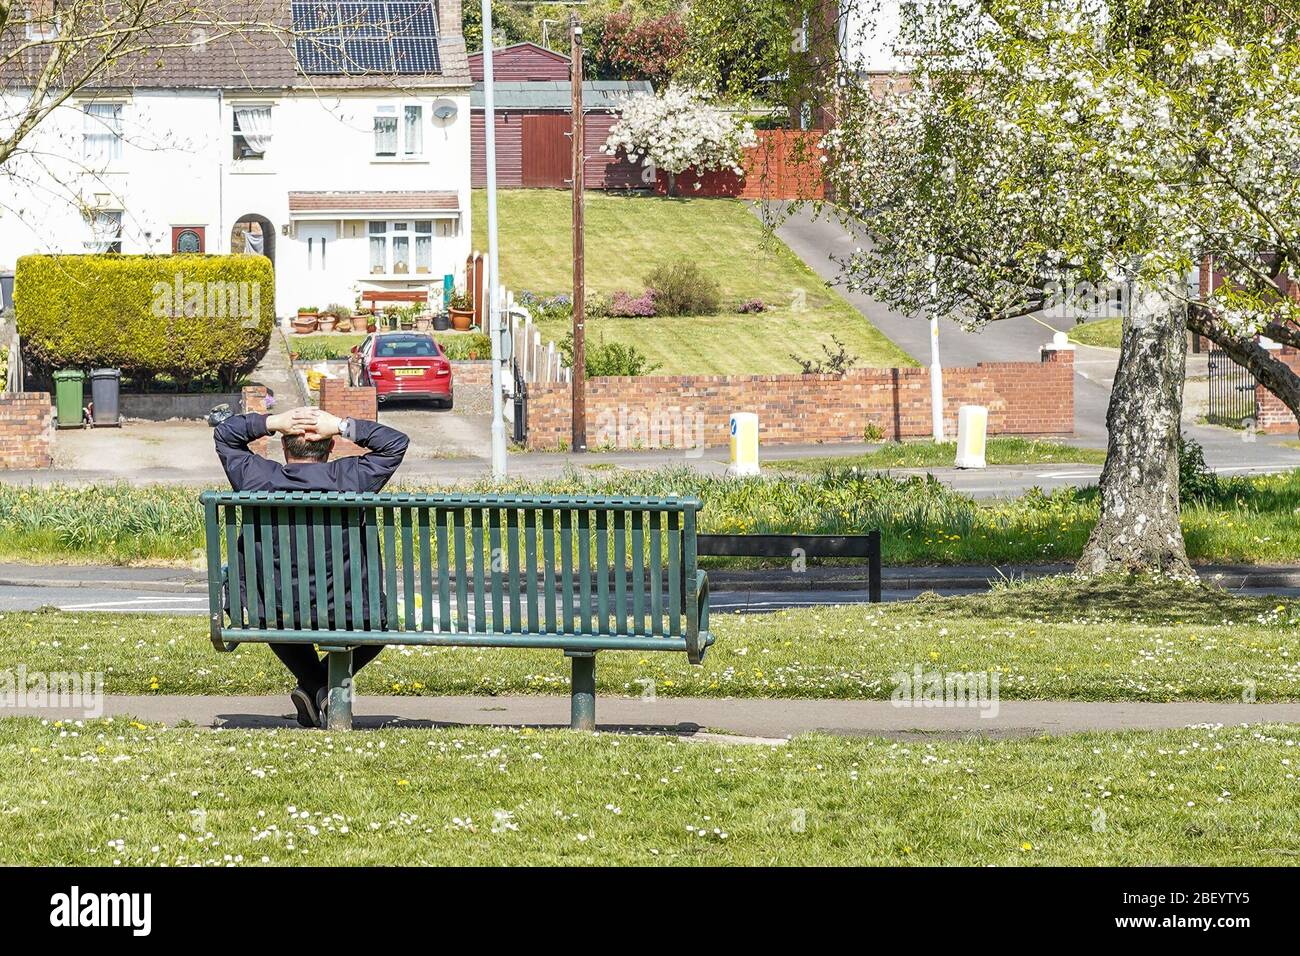 Kidderminster, UK. 16th April, 2020. Under the UK's current lockdown rules, people should be staying at home, coming out only to exercise once a day - be it cycling, jogging, or walking. This man is clearly flouting the coronavirus lockdown rules as he spends time relaxing on a park bench enjoying the April sunshine without any good reason for doing so. This is one individual with complete disregard for the critical 'Stay Home, Protect the NHS, Save Lives' government advice. Credit: Lee Hudson/Alamy Live News Stock Photo